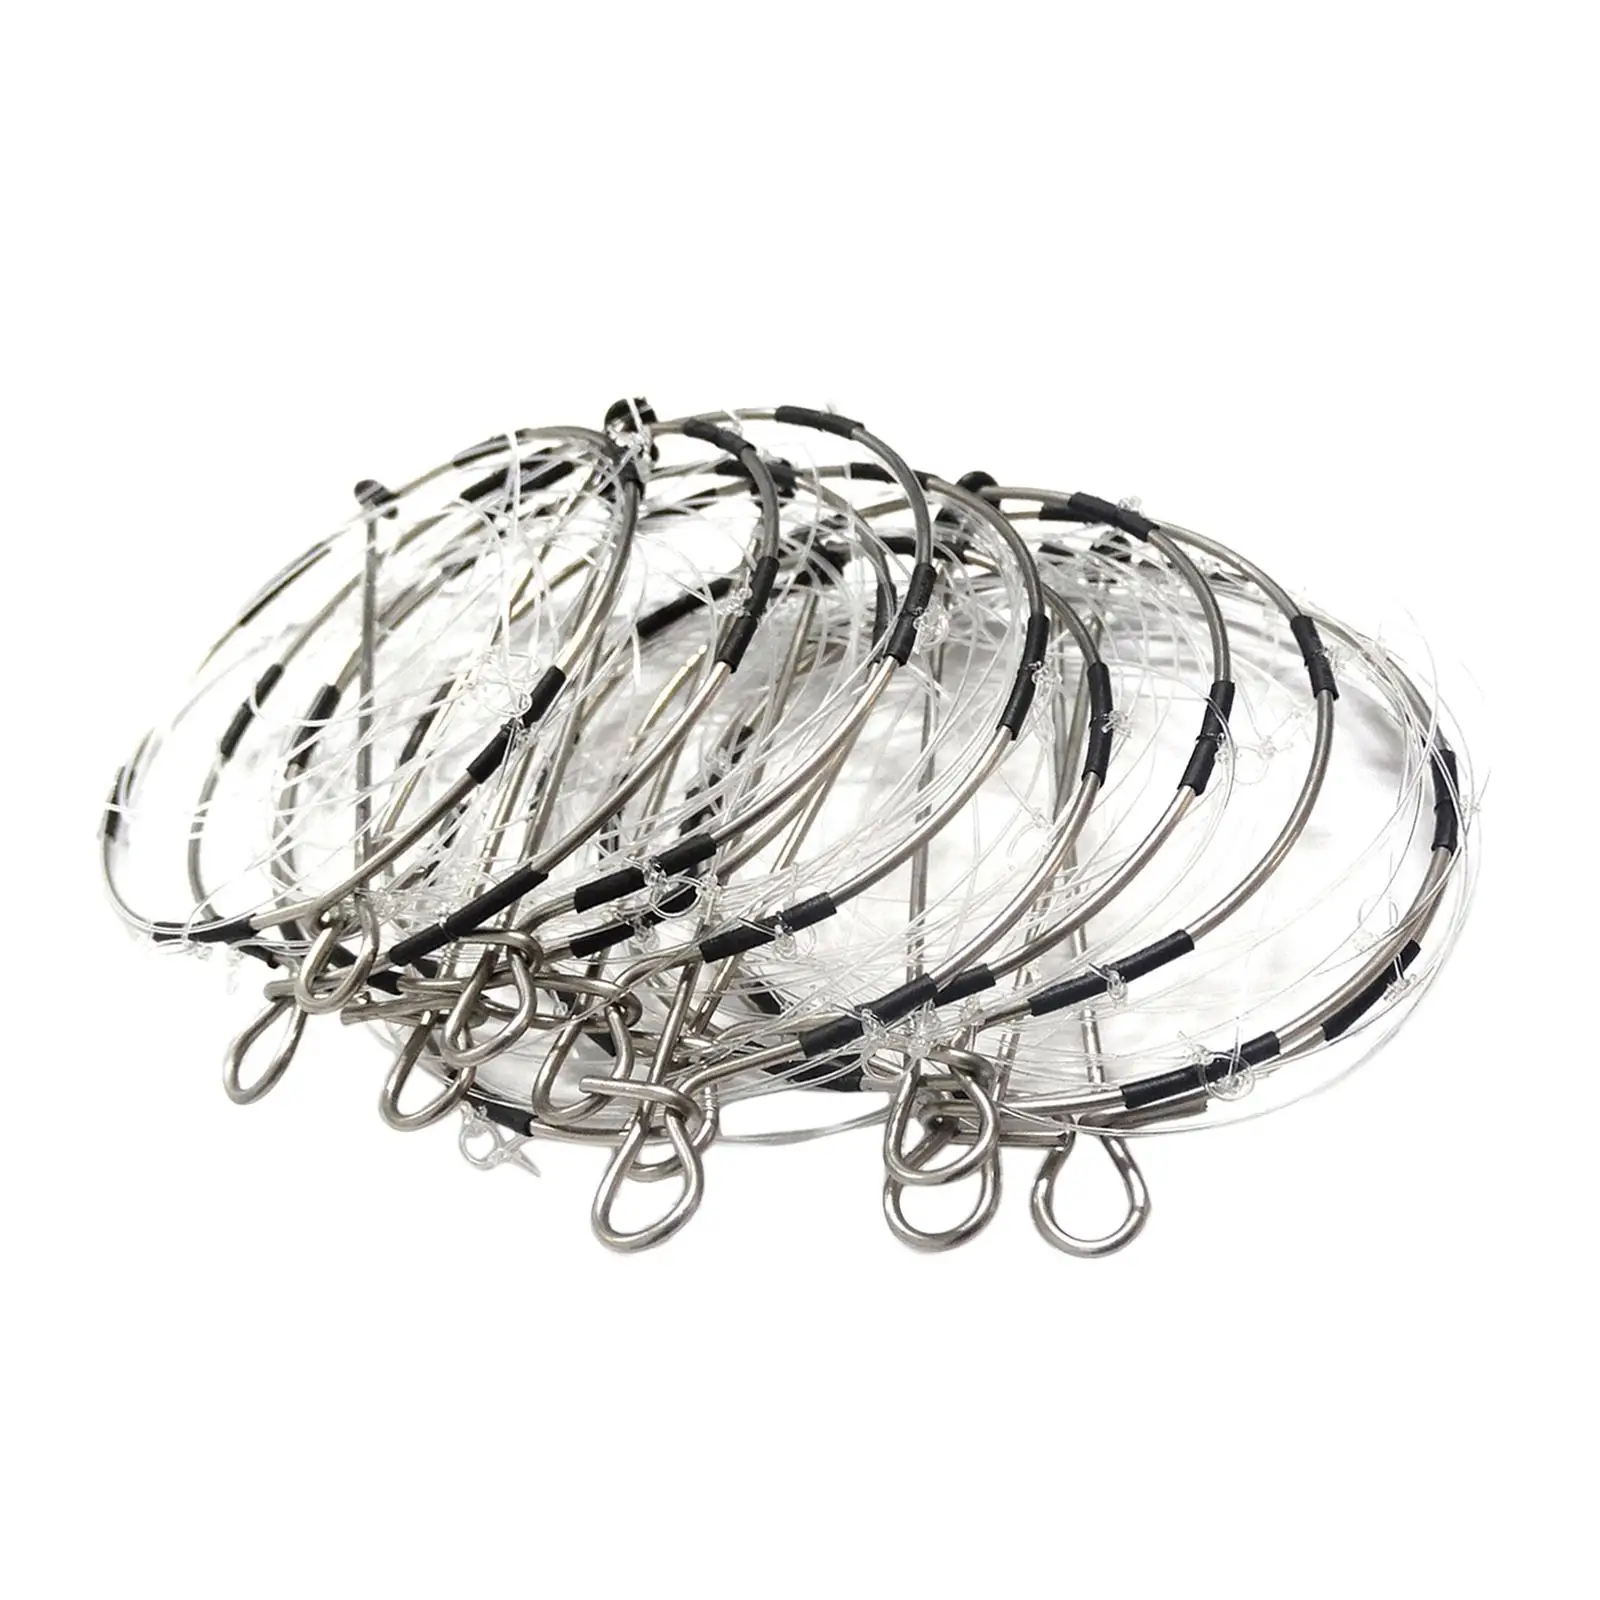 10 Pieces Crab Trap Collapsible Six Movable Buckles Repeated Use Steel Fishing Bait Trap for Prawn shrimp Lobster Crawdad Rivers